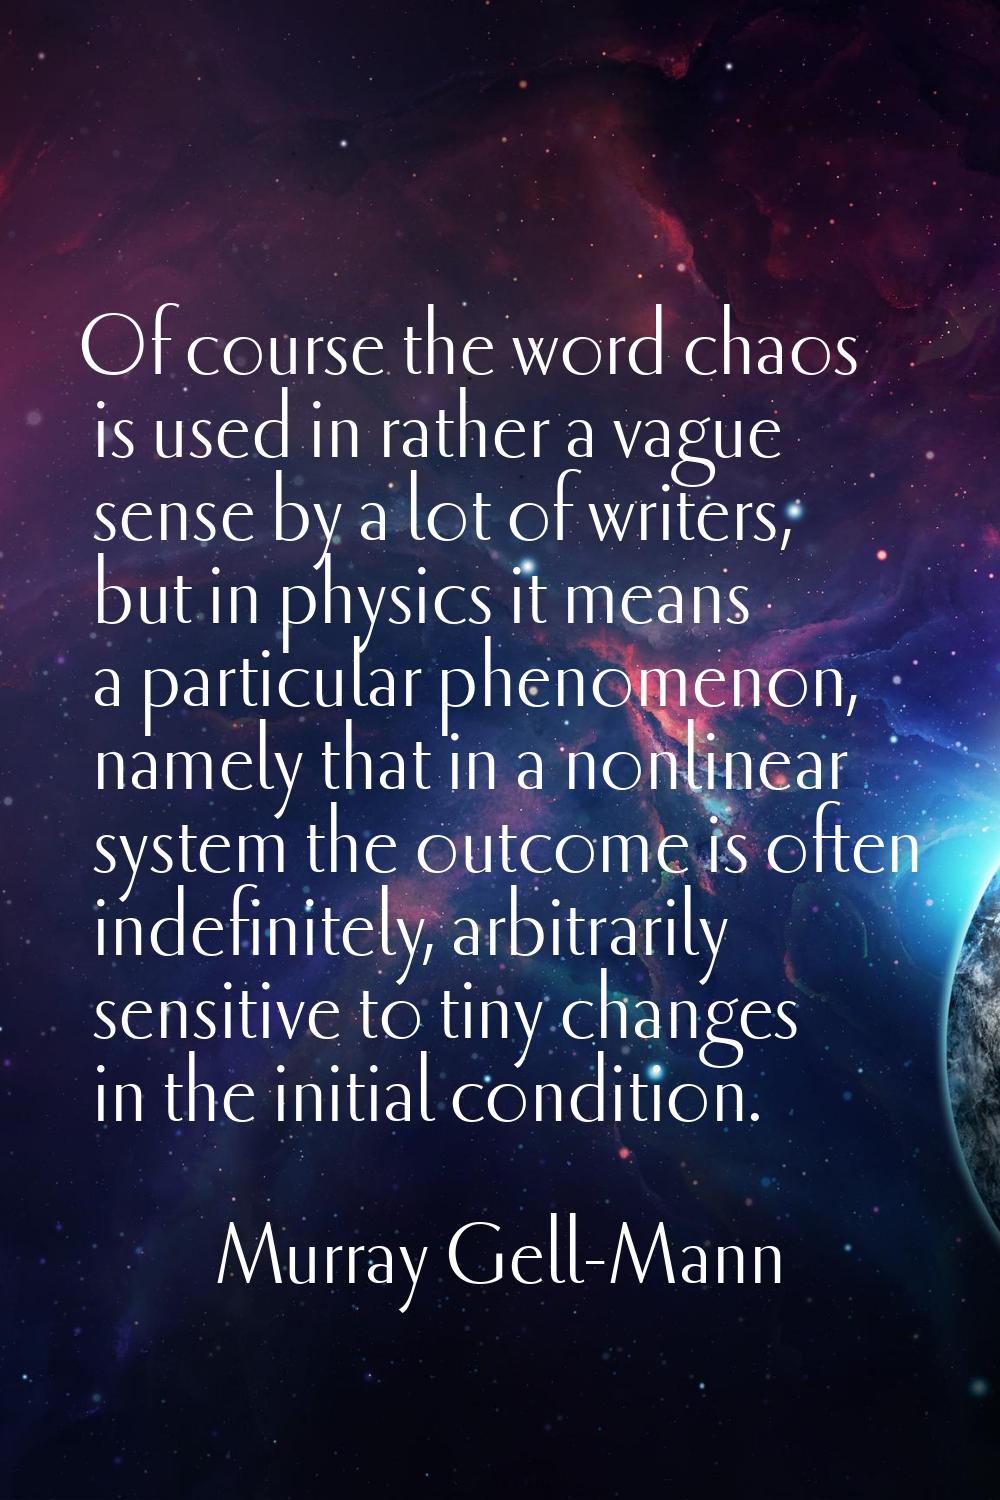 Of course the word chaos is used in rather a vague sense by a lot of writers, but in physics it mea